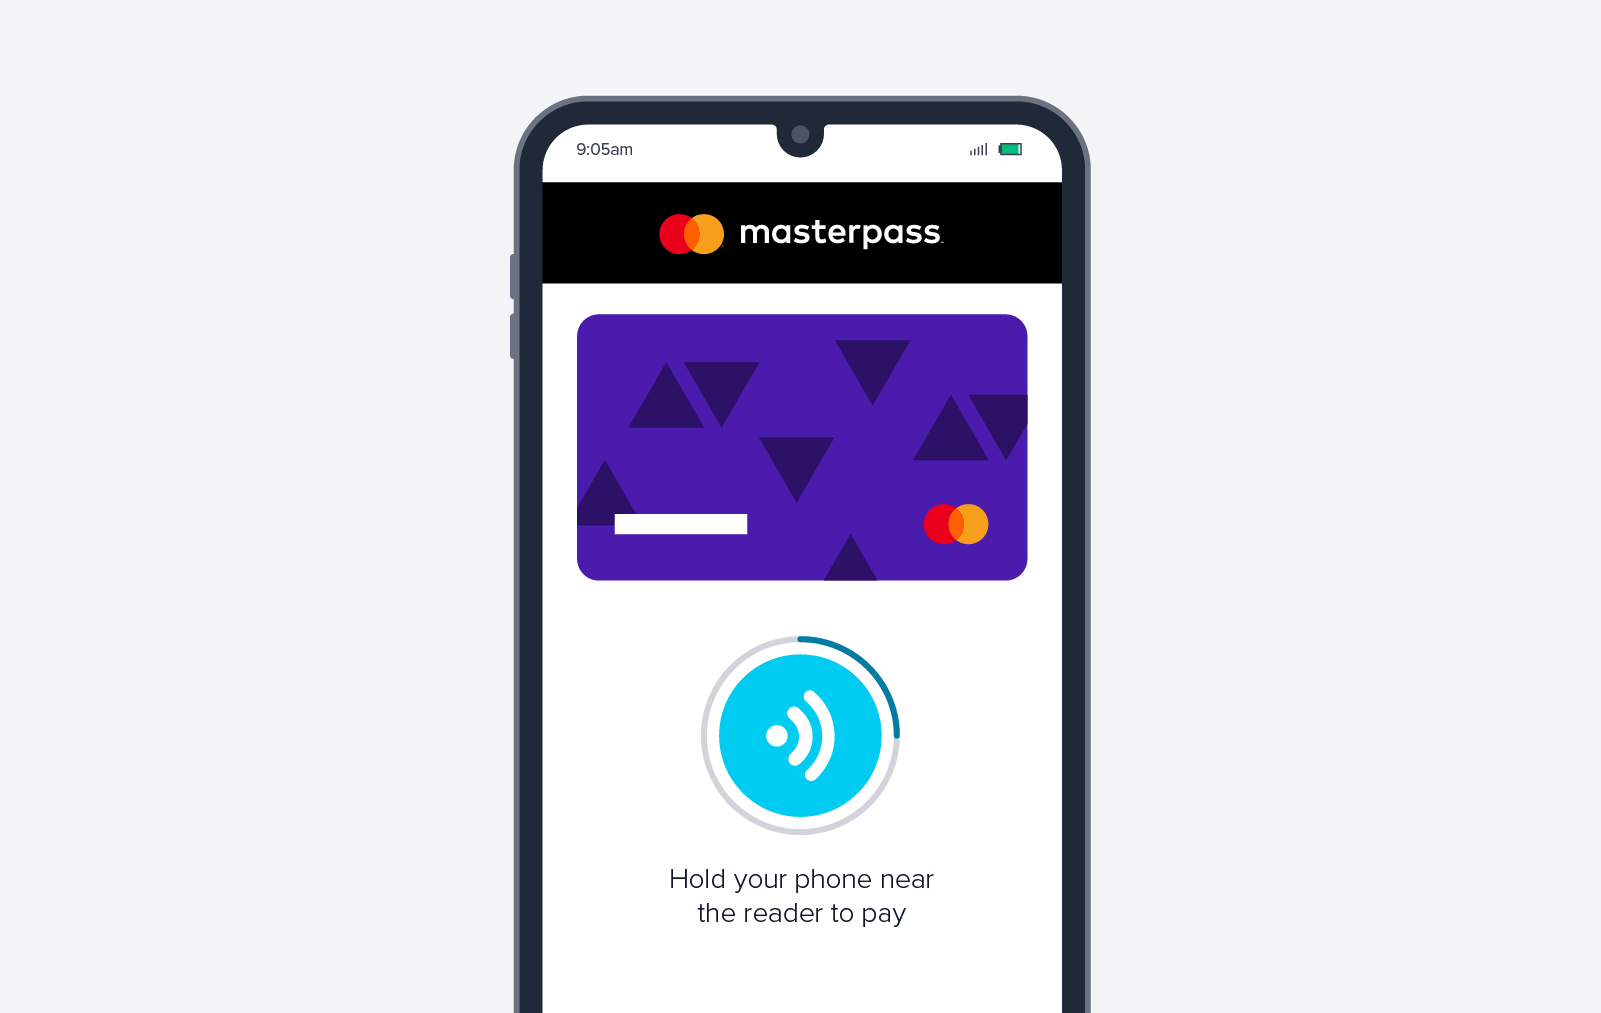 Mastercard helps with customer loyalty by having users sign up for Masterpass